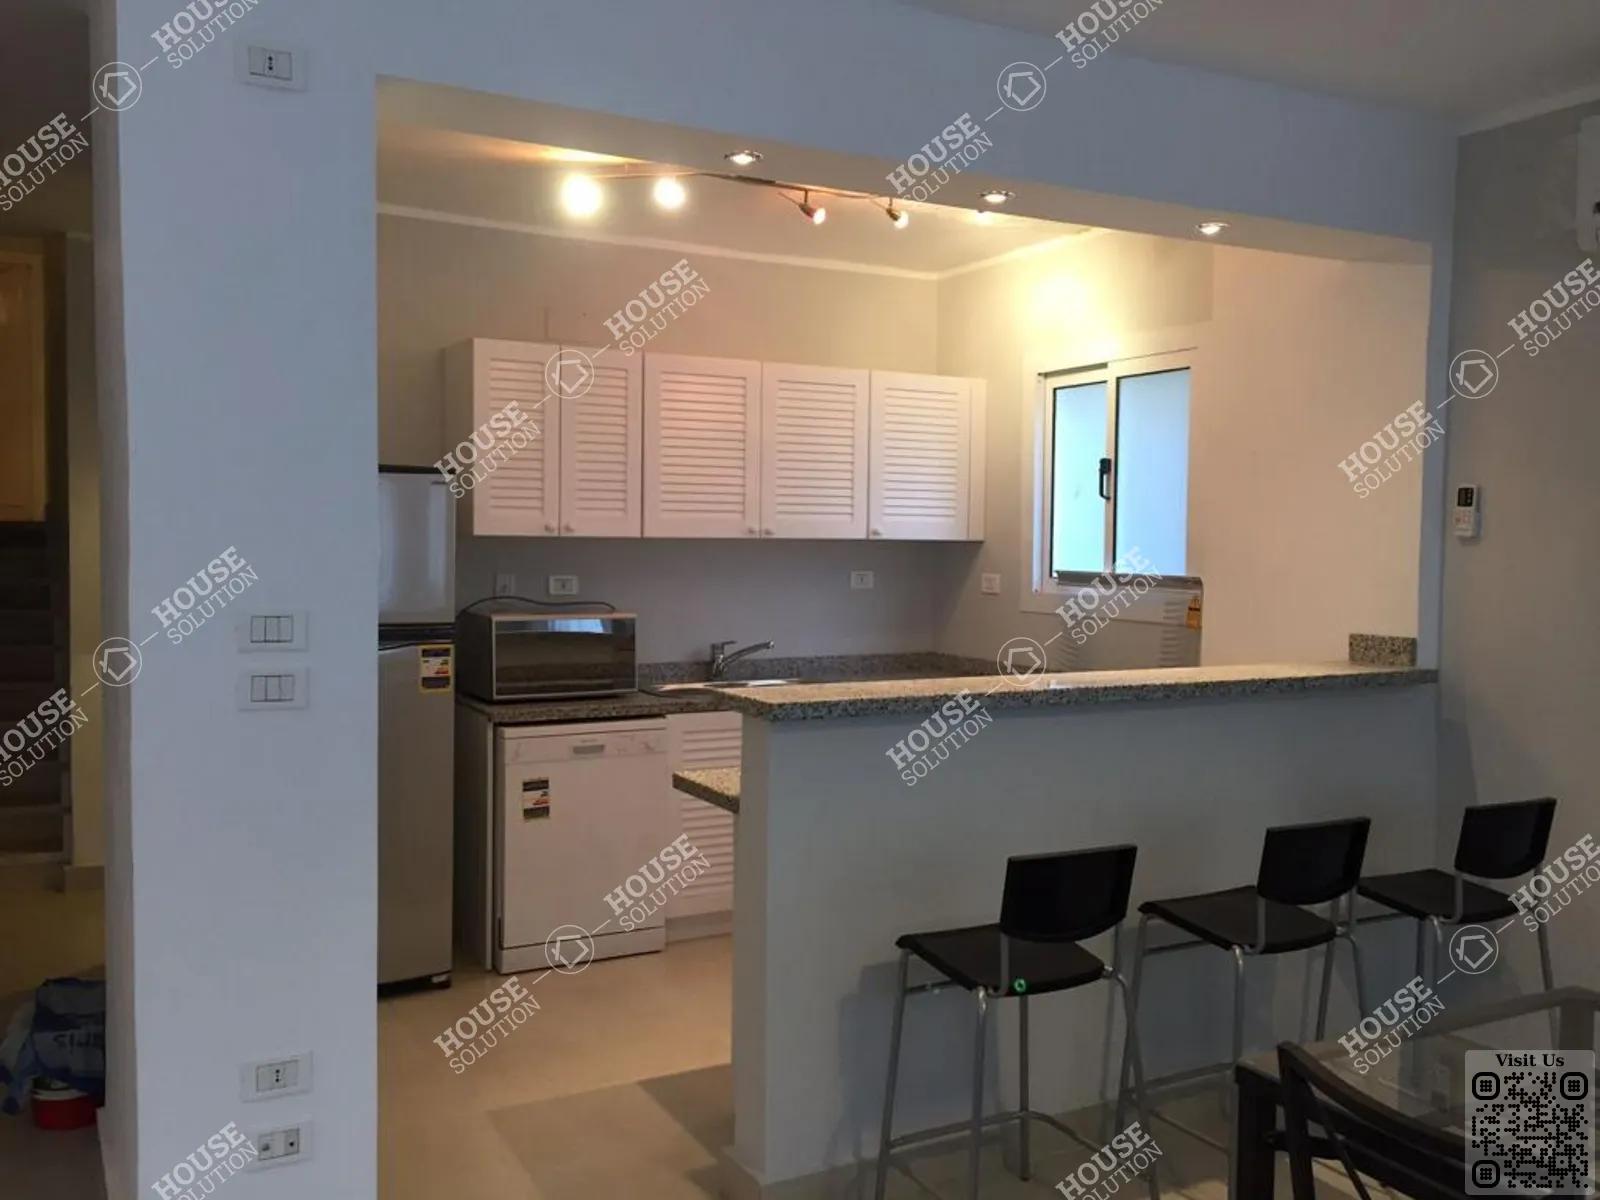 KITCHEN  @ Apartments For Rent In Maadi Maadi Sarayat Area: 160 m² consists of 3 Bedrooms 2 Bathrooms Modern furnished 5 stars #5469-1